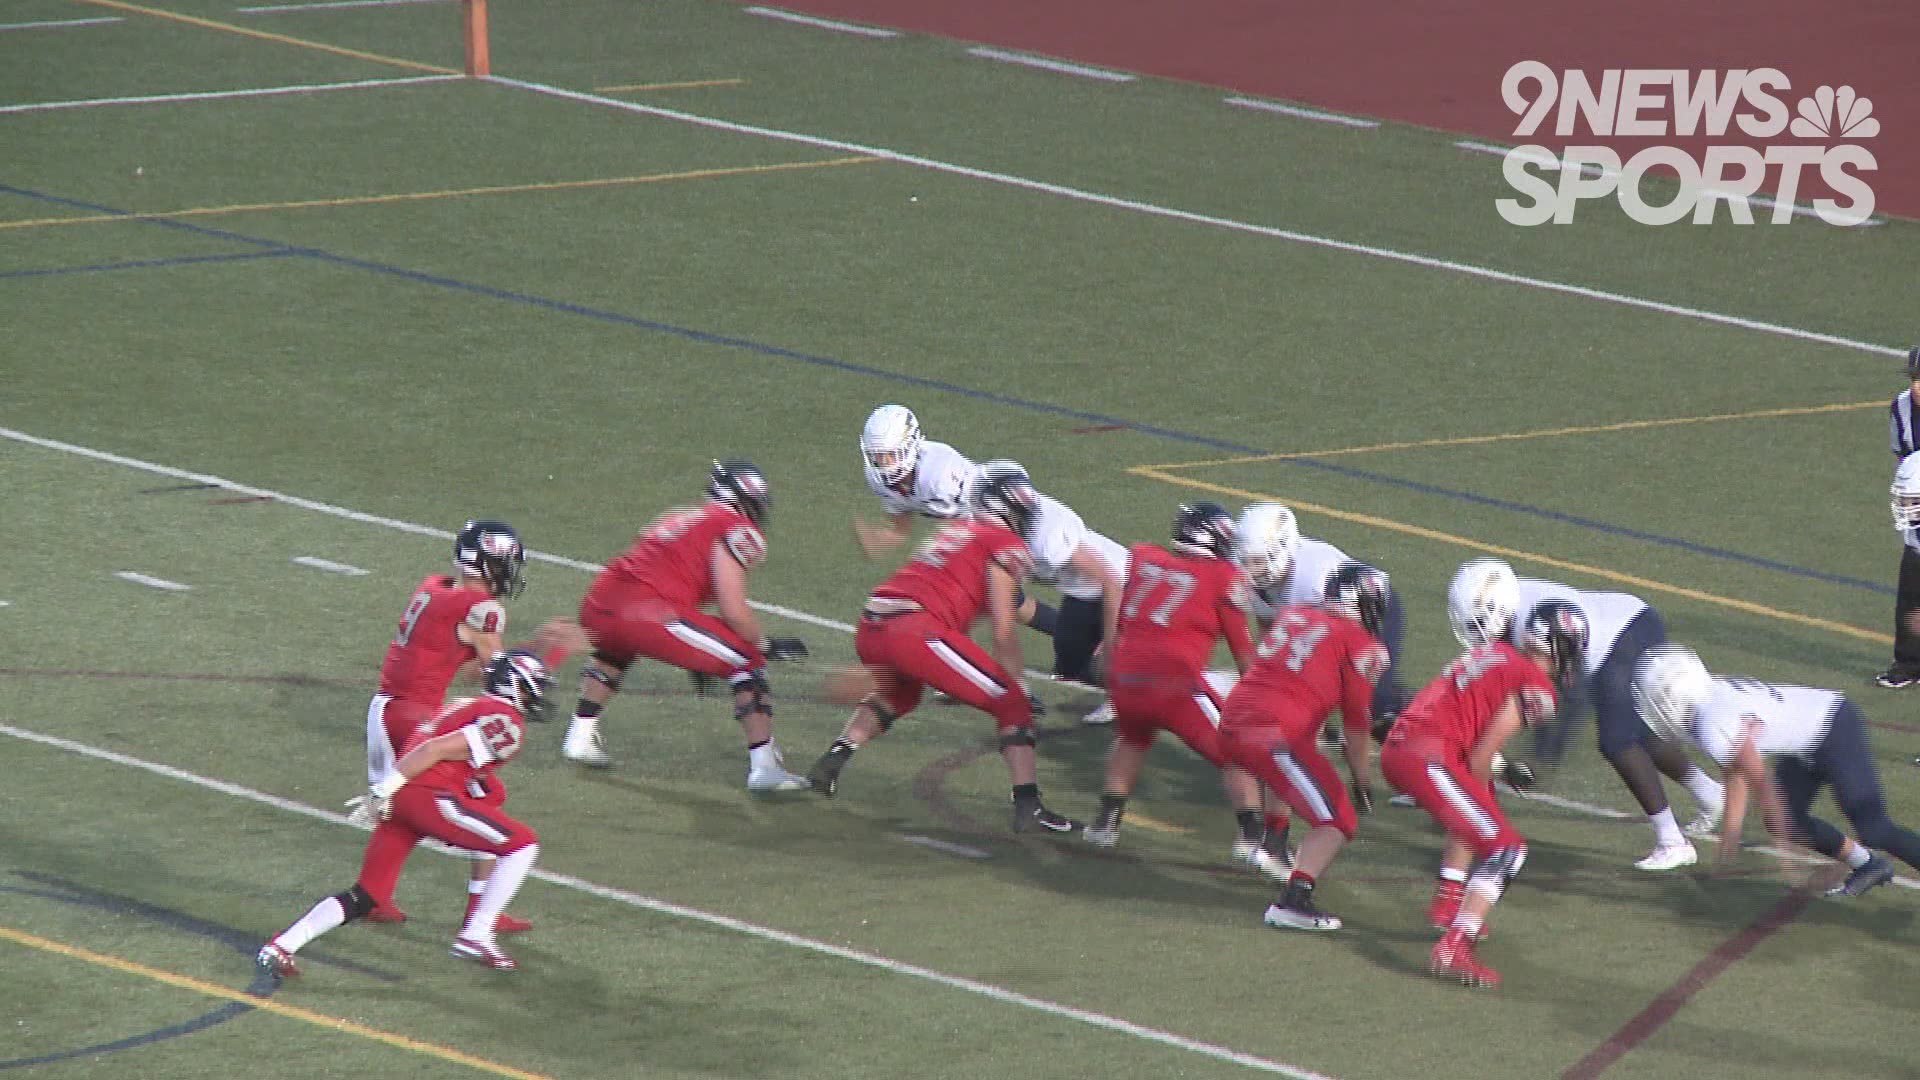 Legacy took a 24-7 lead in the third quarter before Eaglecrest rallied with 20 unanswered points to win the game.